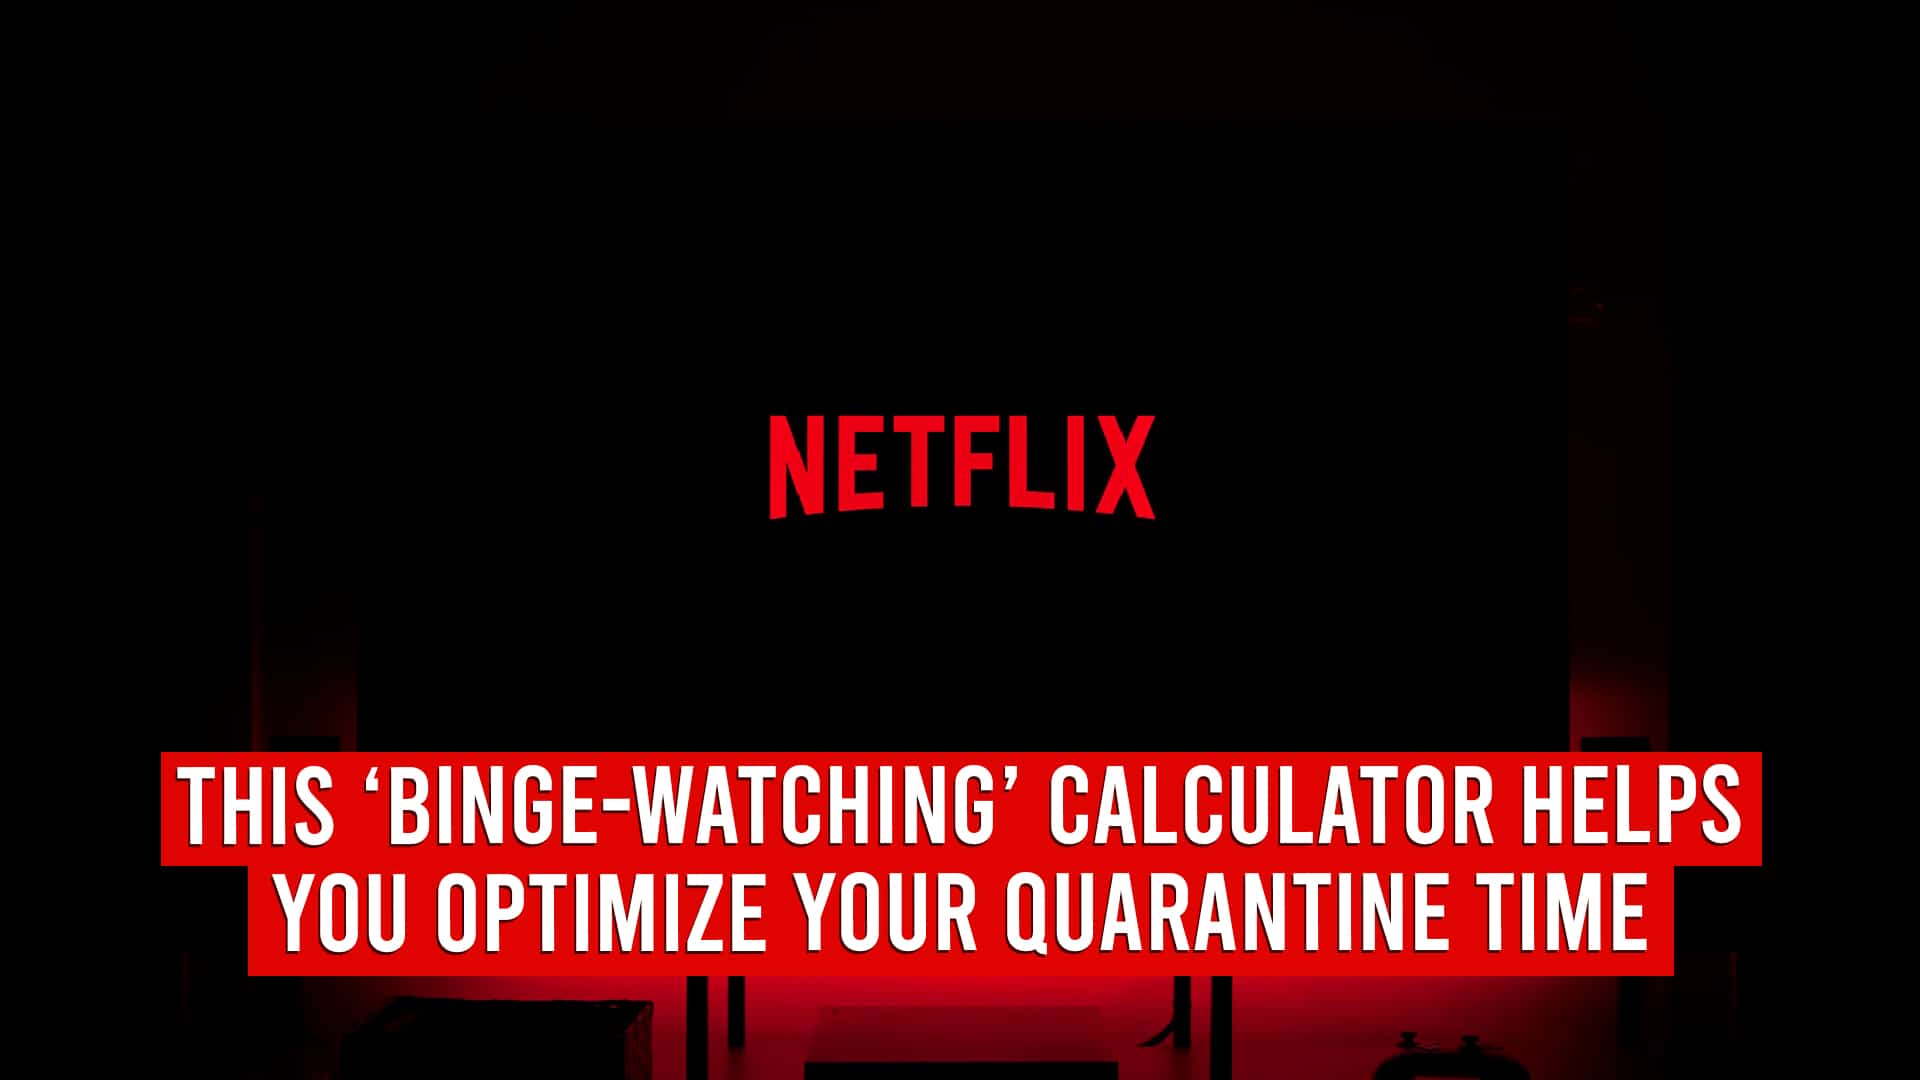 This Binge Watching Calculator Helps You Optimize Your Quarantine Time